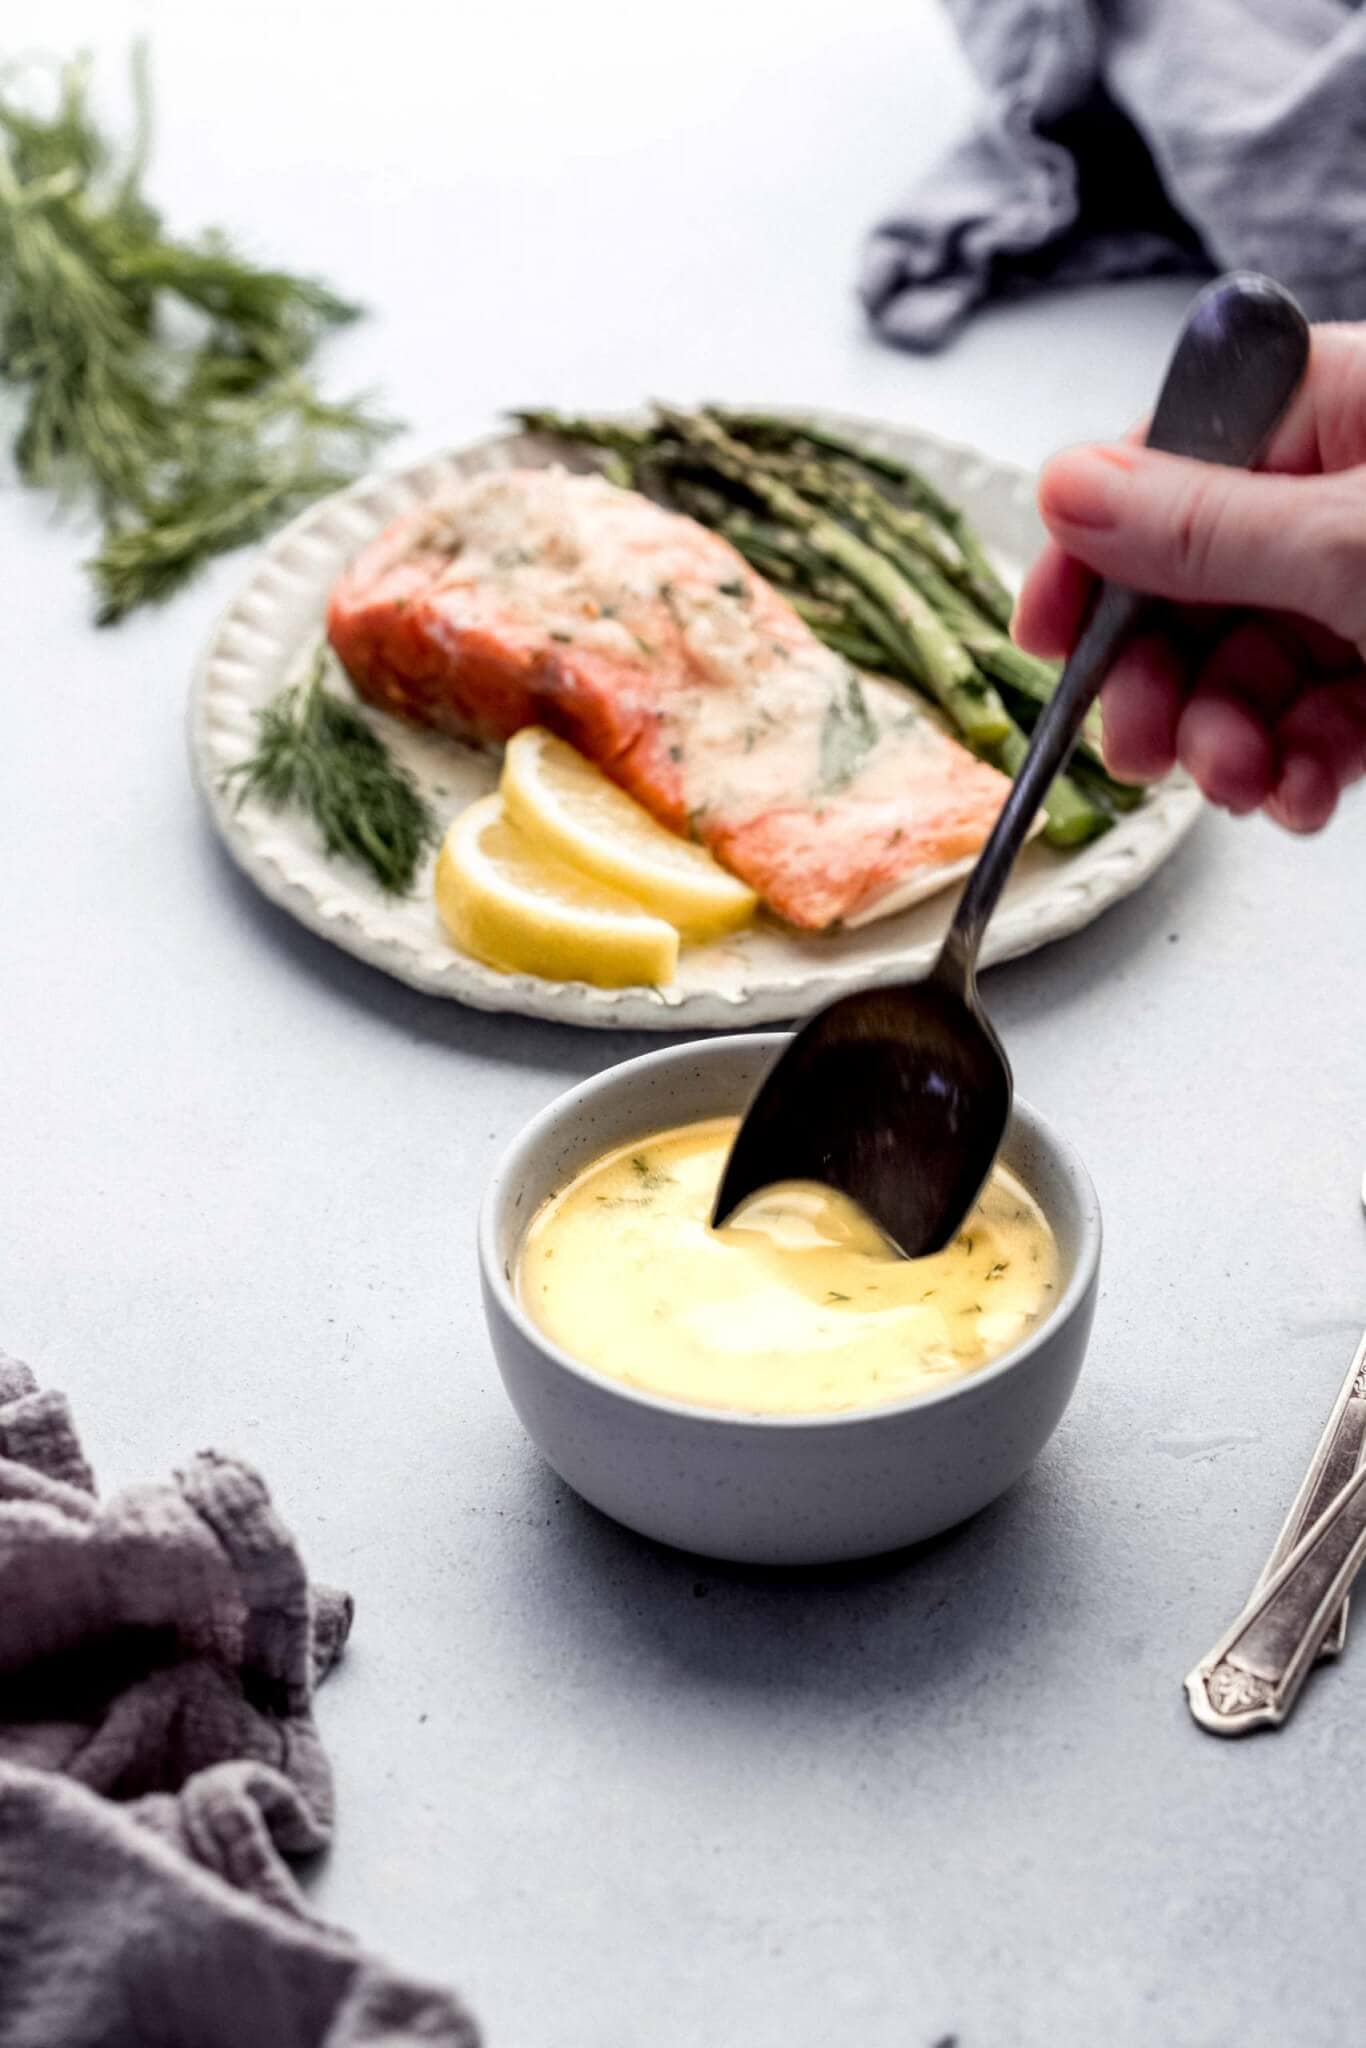 Spoon stirring lemon butter sauce in small white bowl next to plate of salmon and asparagus